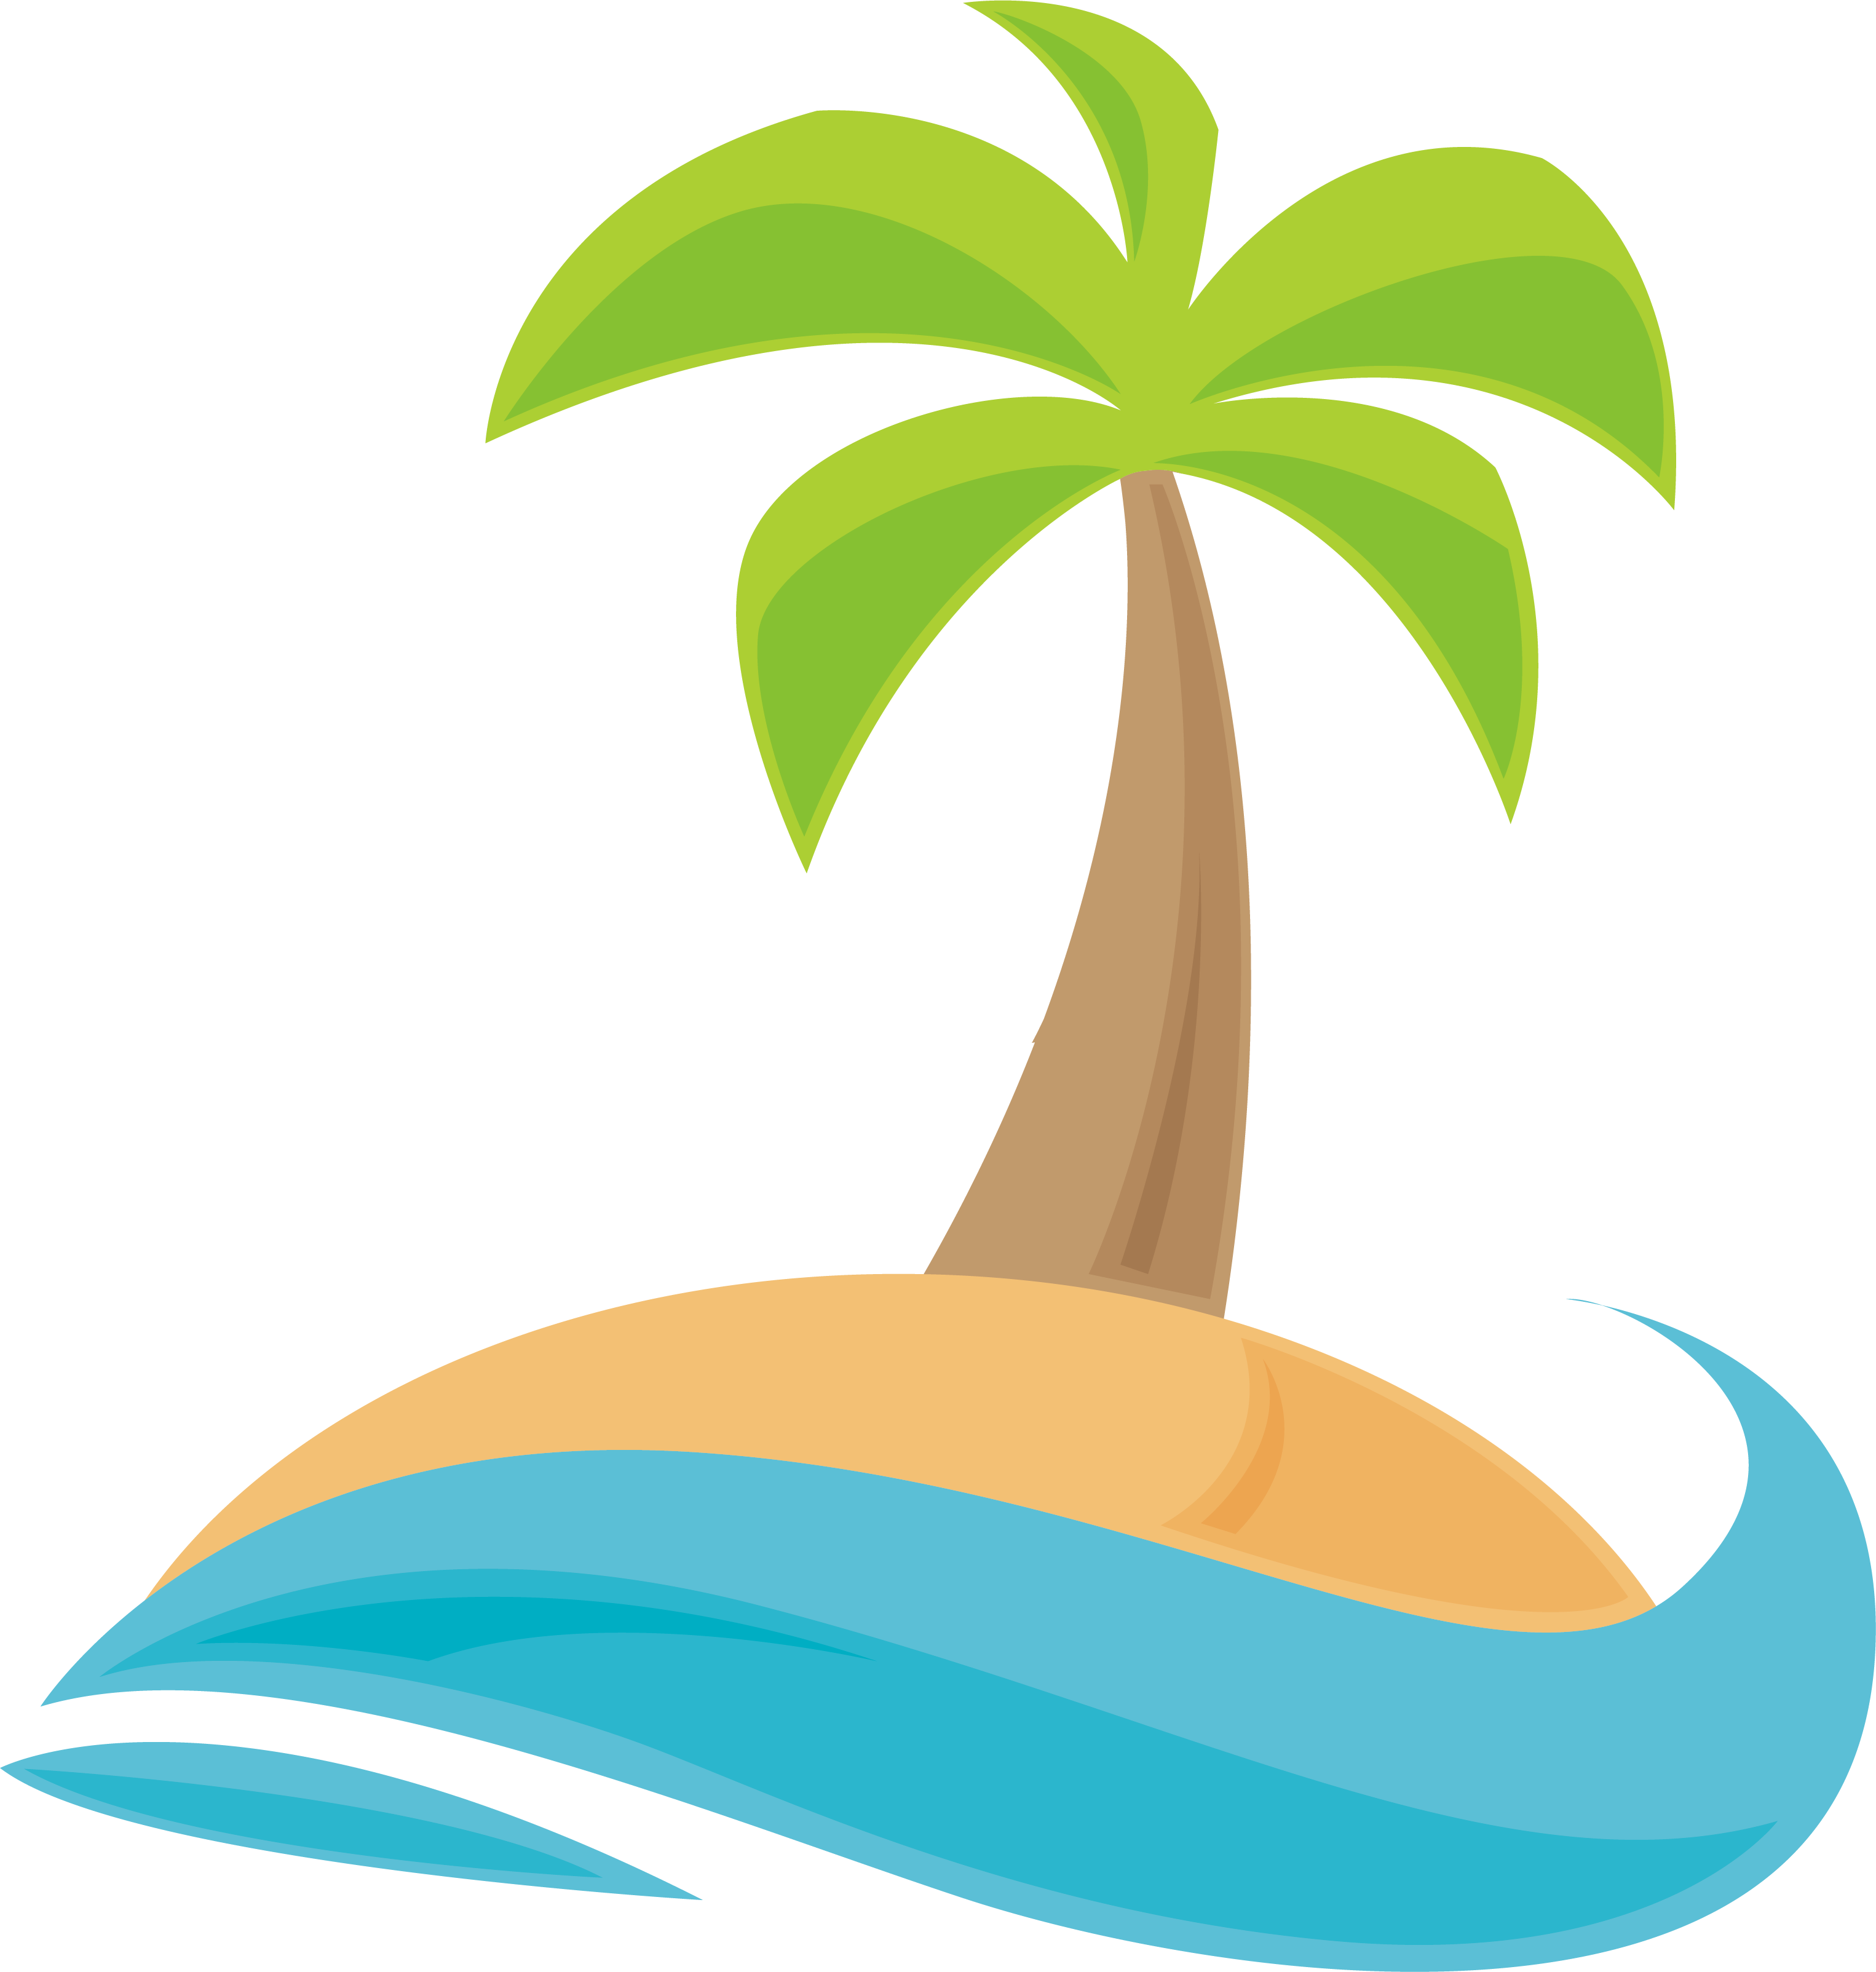 Palm Tree Leaves Clipart at GetDrawings Free download